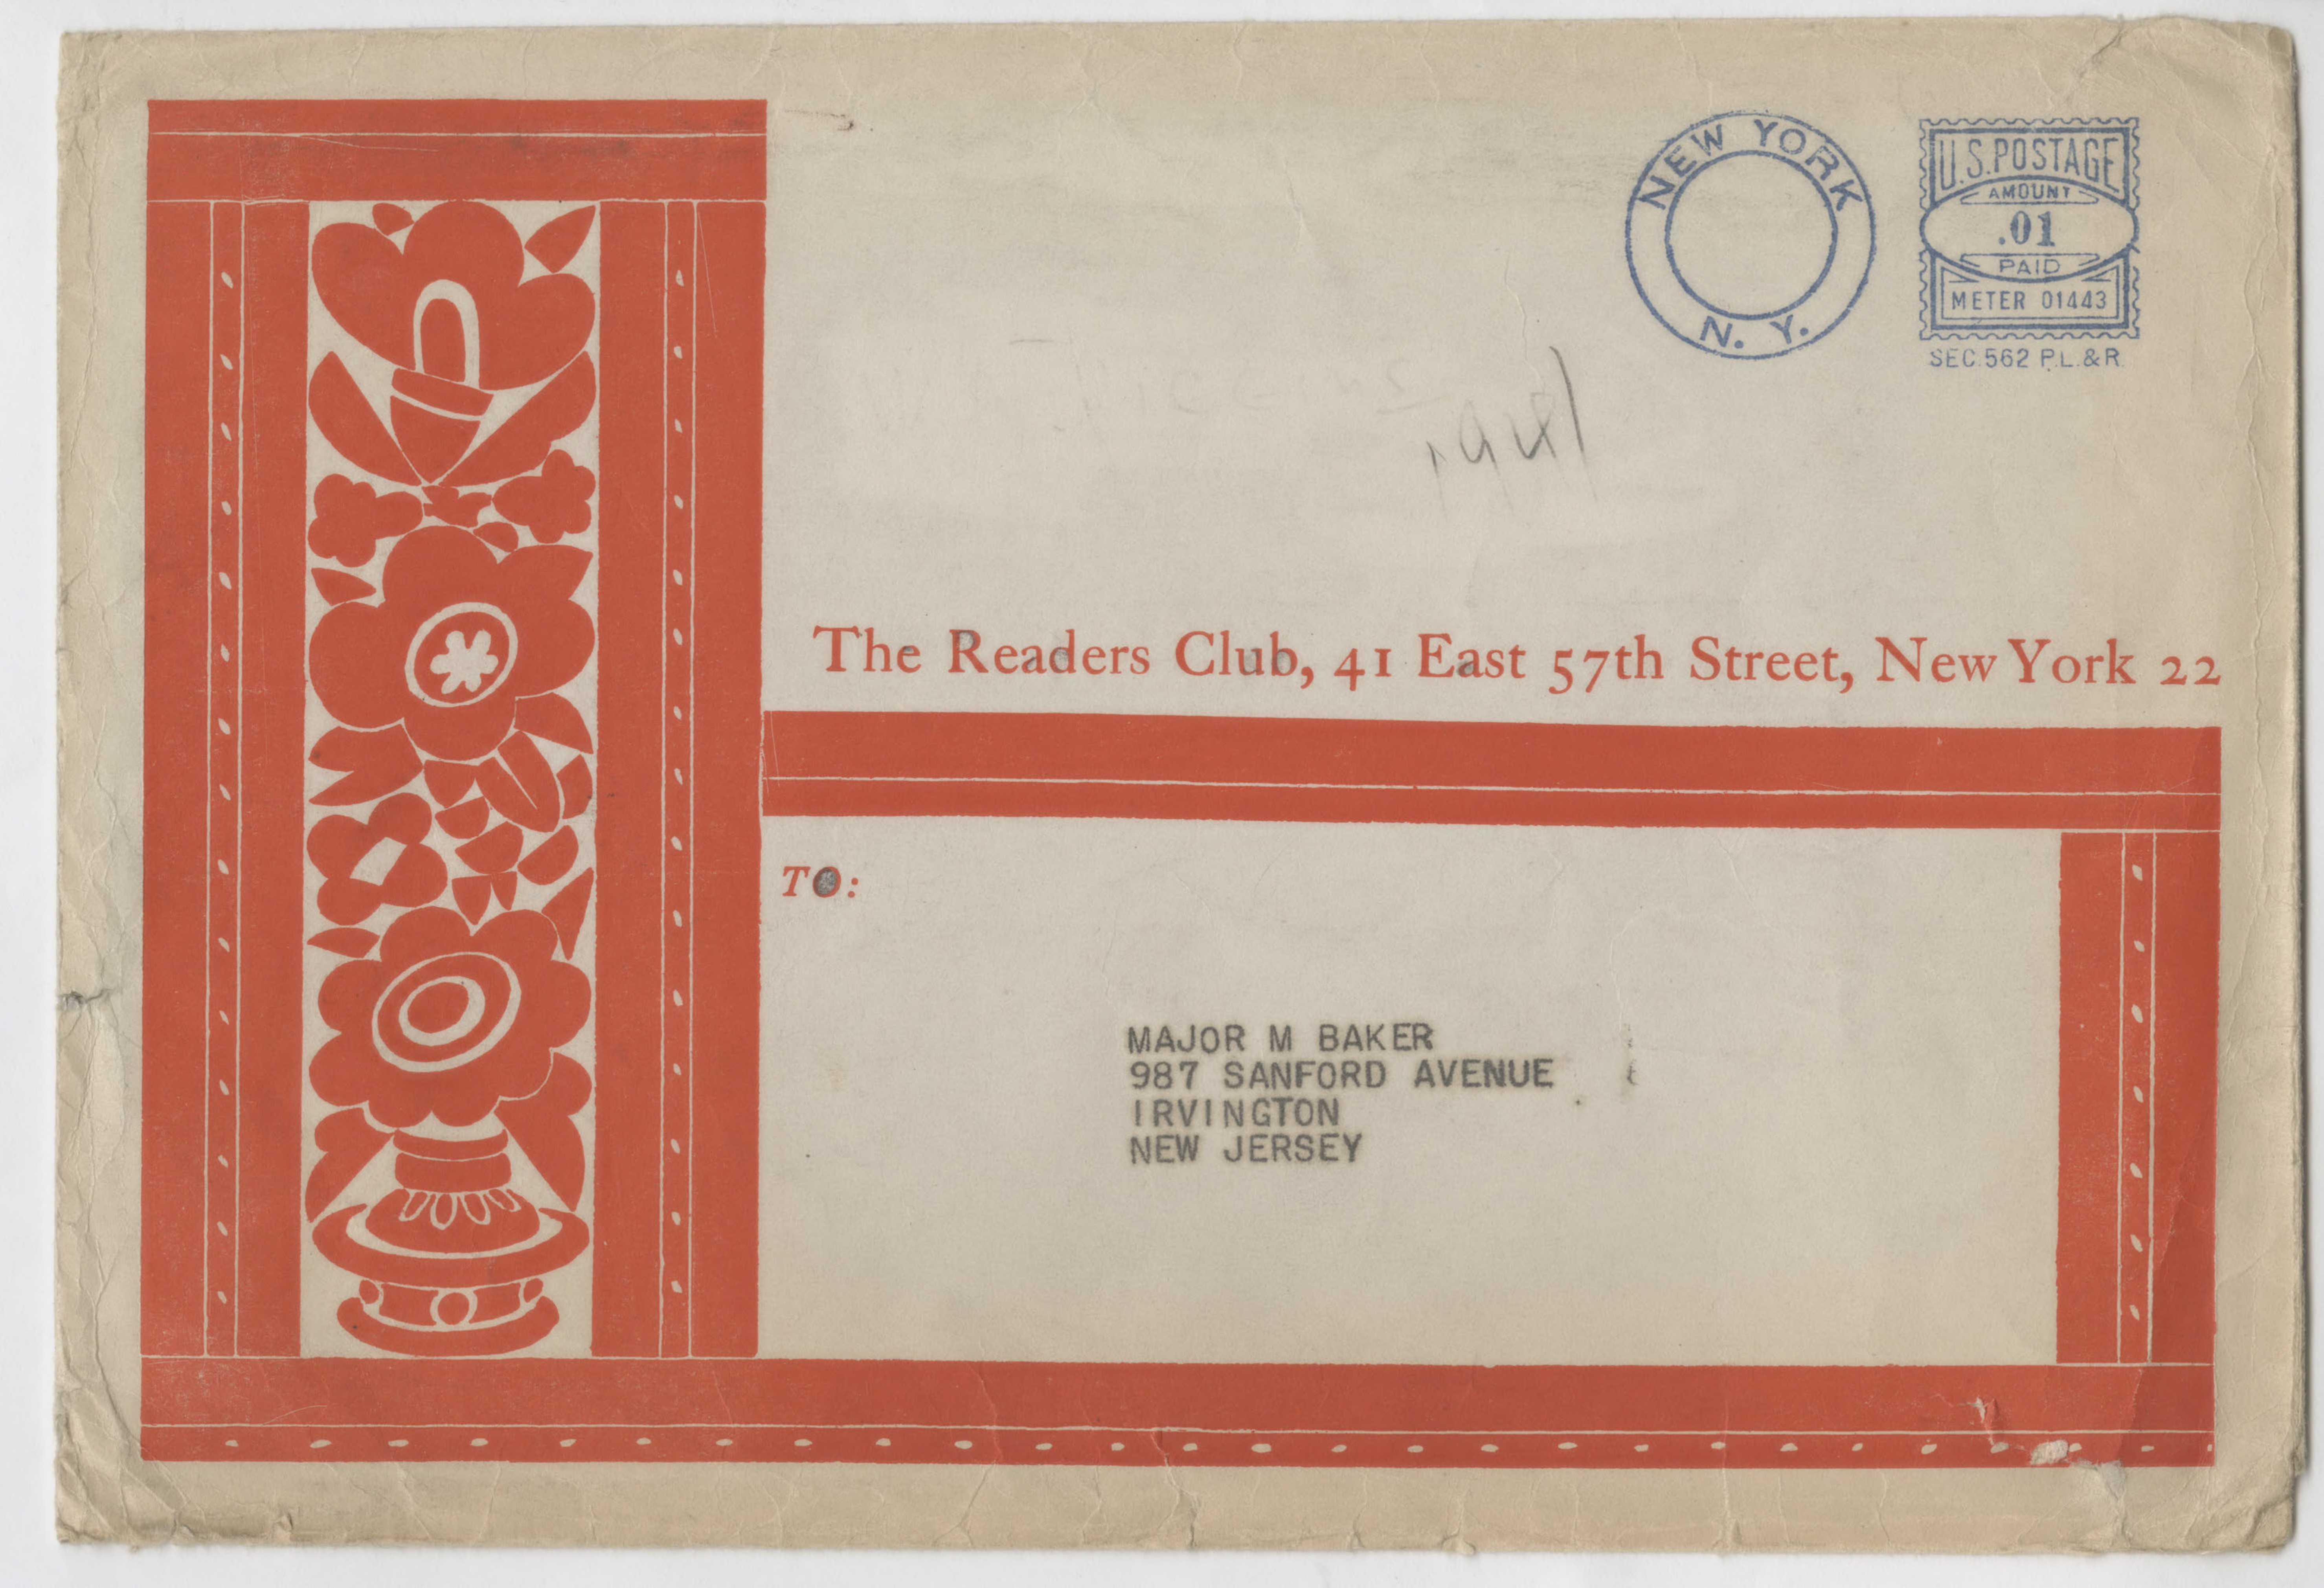 Mailing envelope designed by W.A. Dwiggins for the Readers Club. 1941.